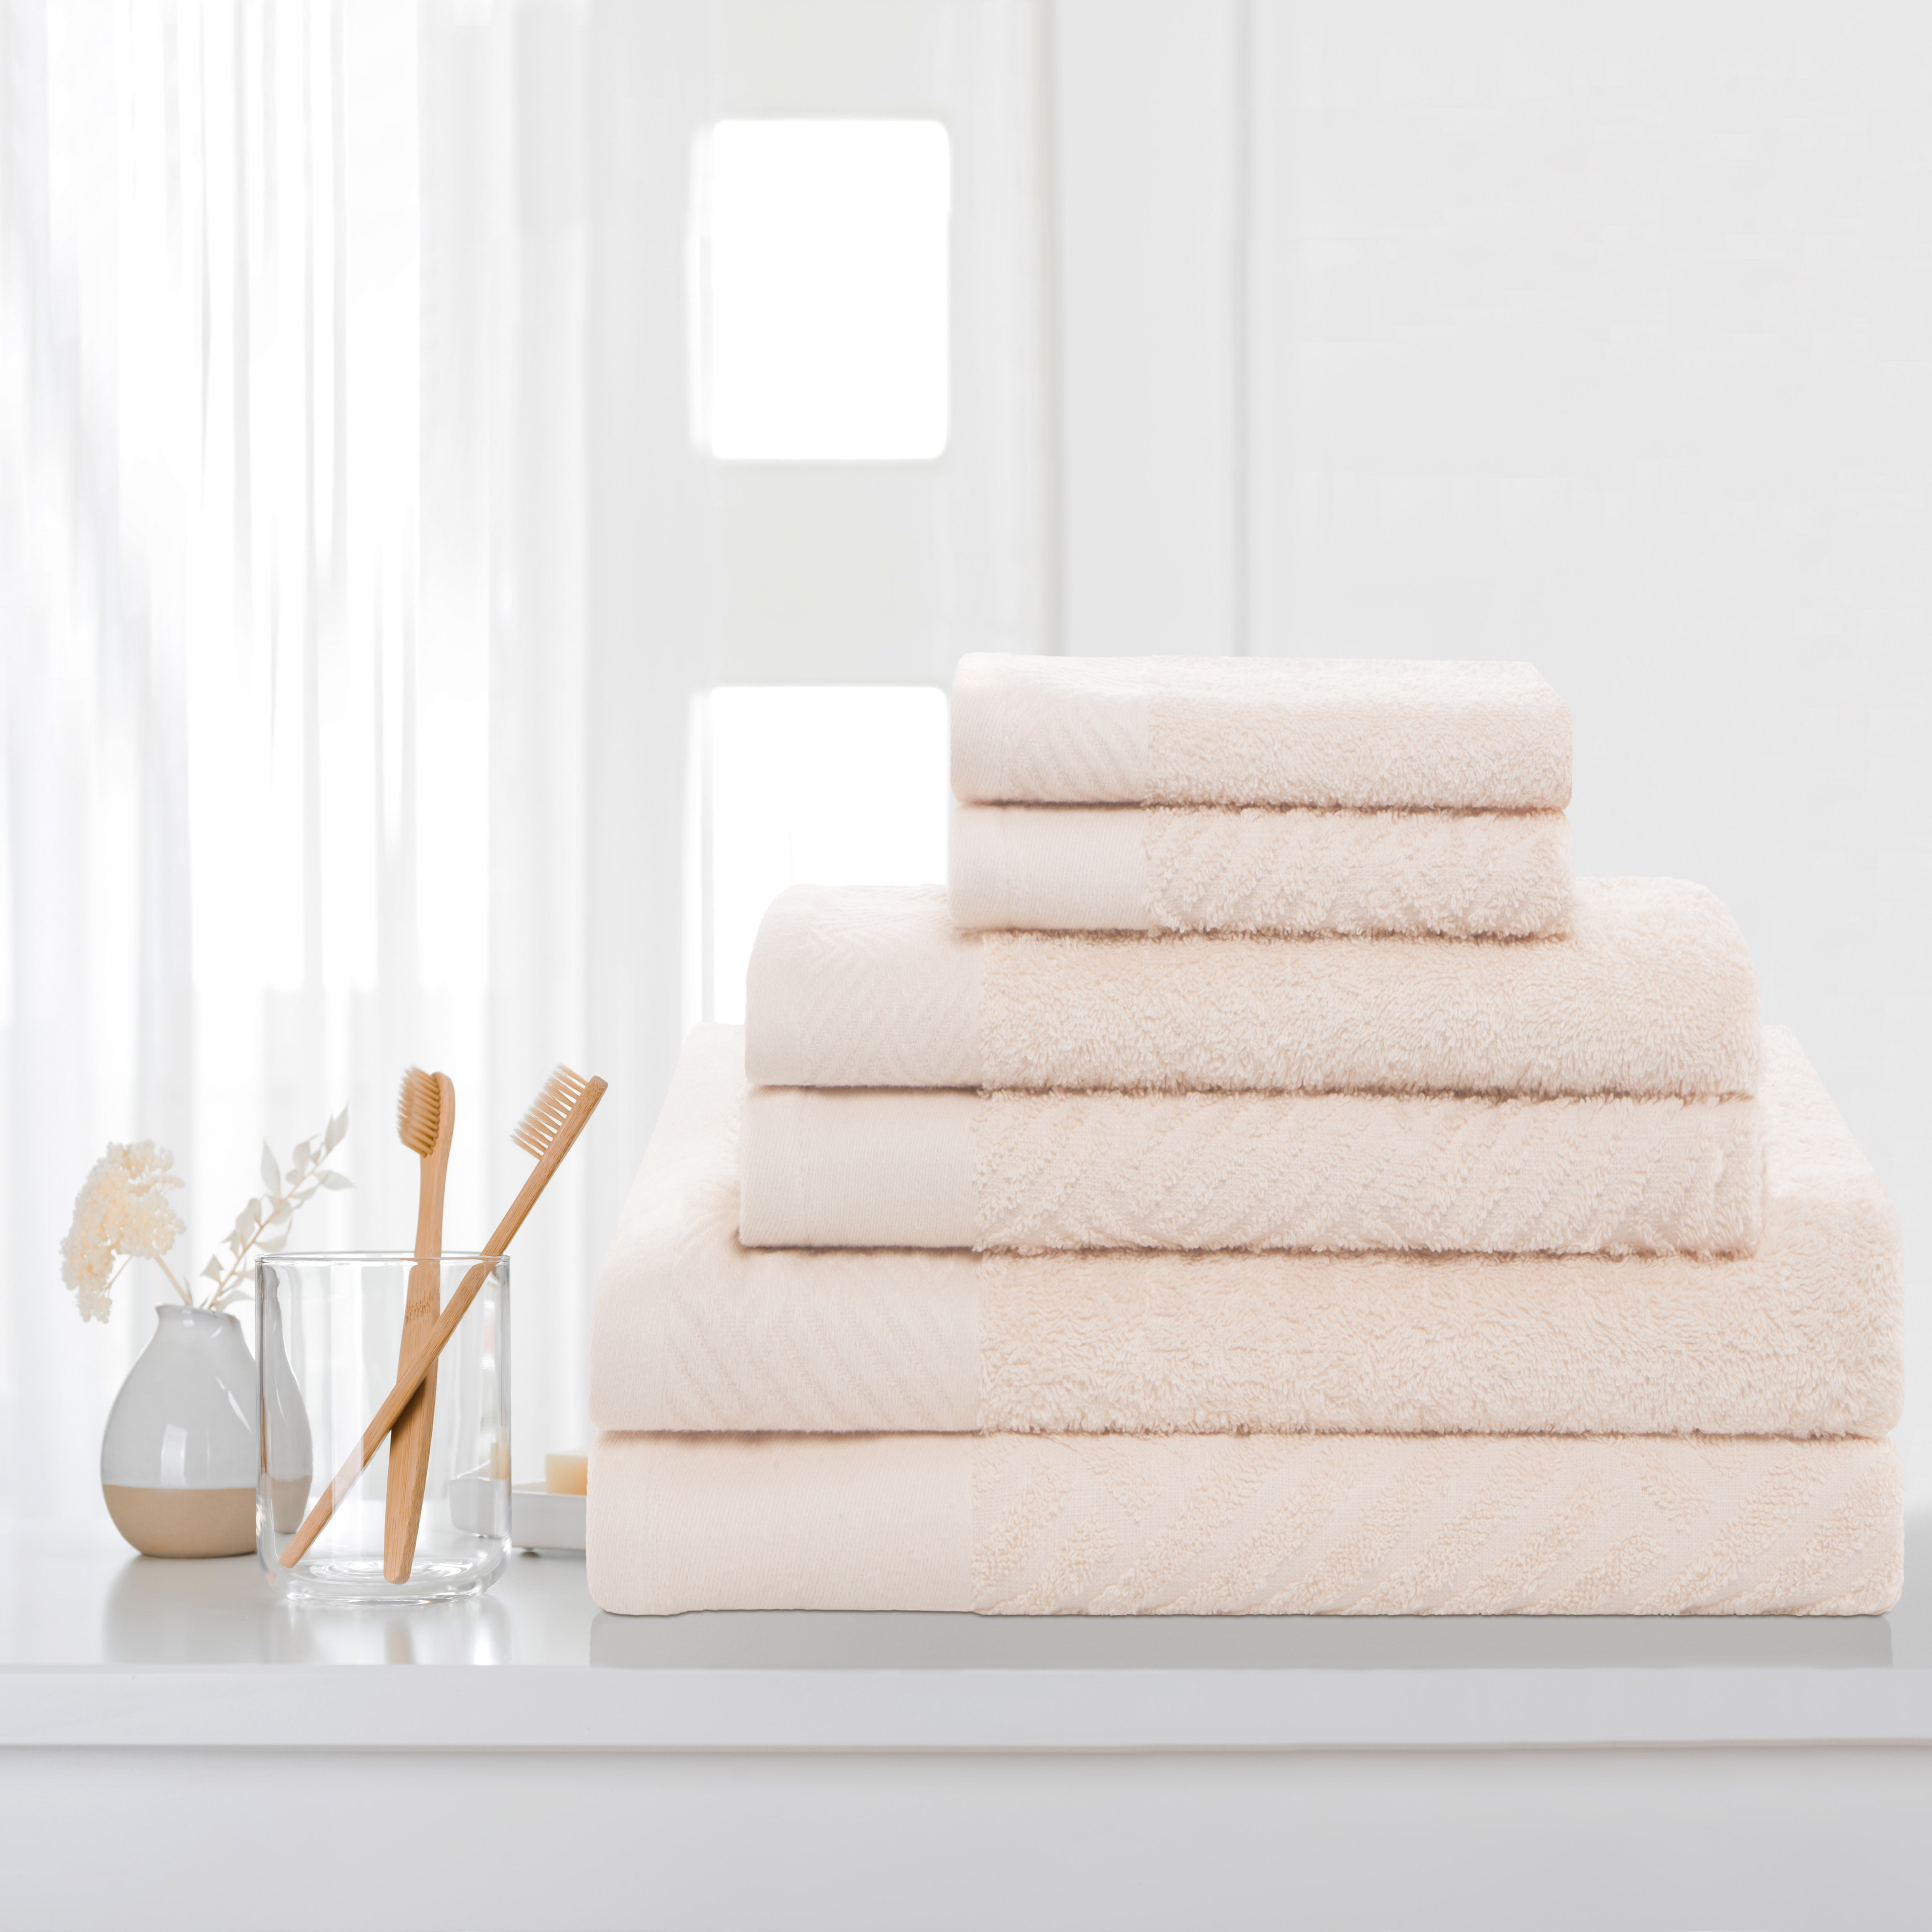 Clearance Sale! Luxury Thick Soft Absorbent Egyptian Cotton Face Washing  Hand Towel, 34cm x 75cm, White